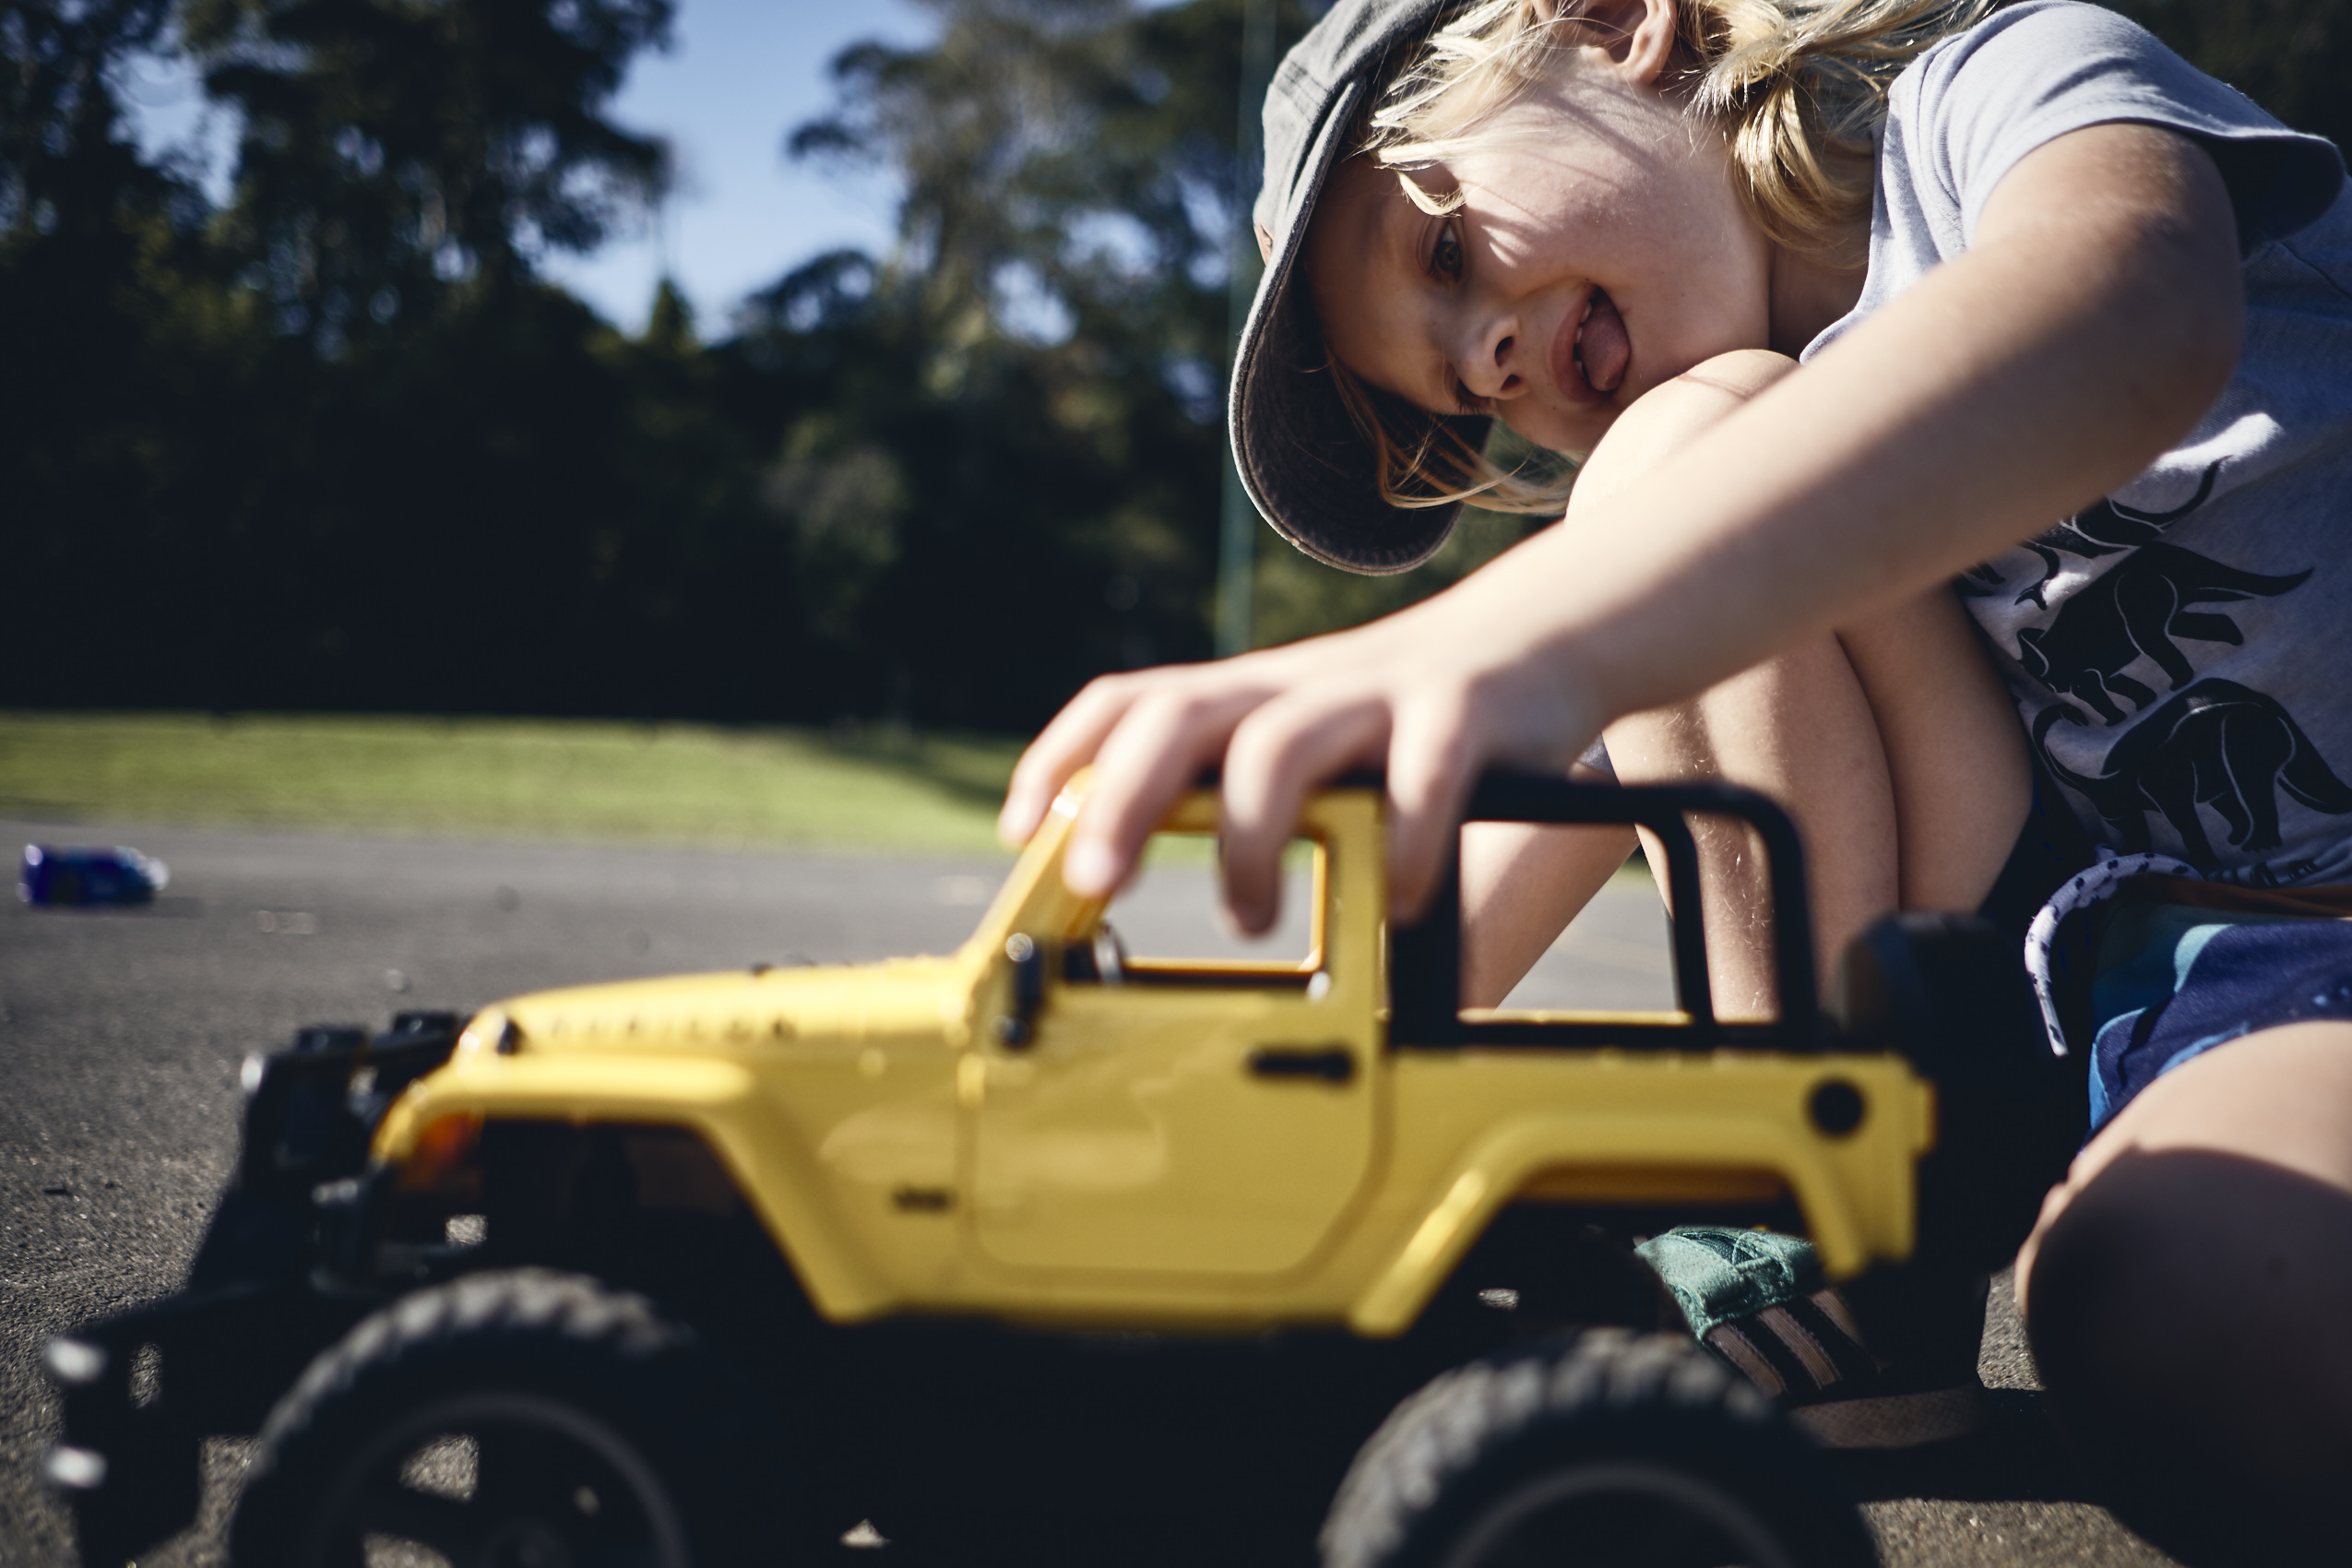 Lockdown • Small Boy Playing with Yellow Truck Outside • Lifestyle & Portrait Photography